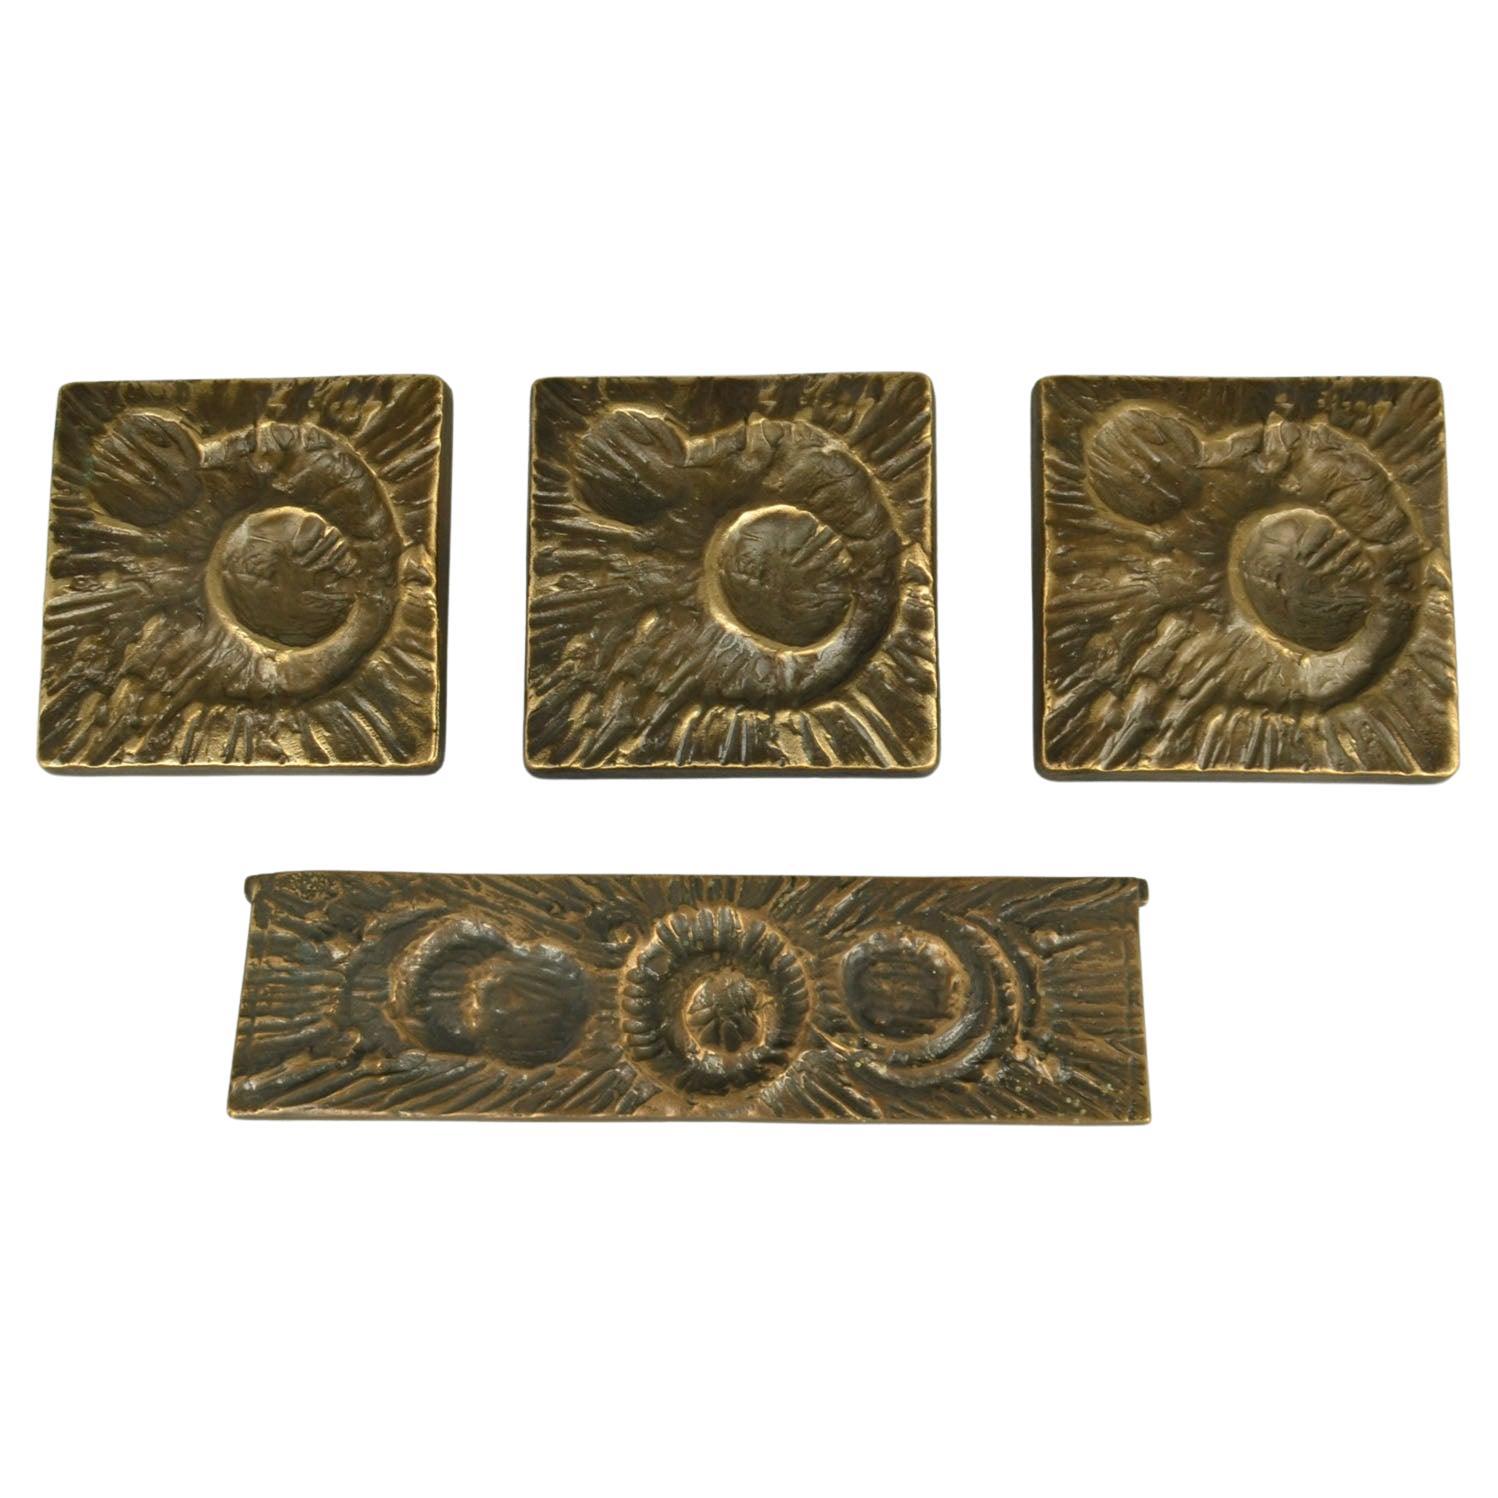 Architectural Push Pull Door Handles and Letterbox with Crater Relief For Sale